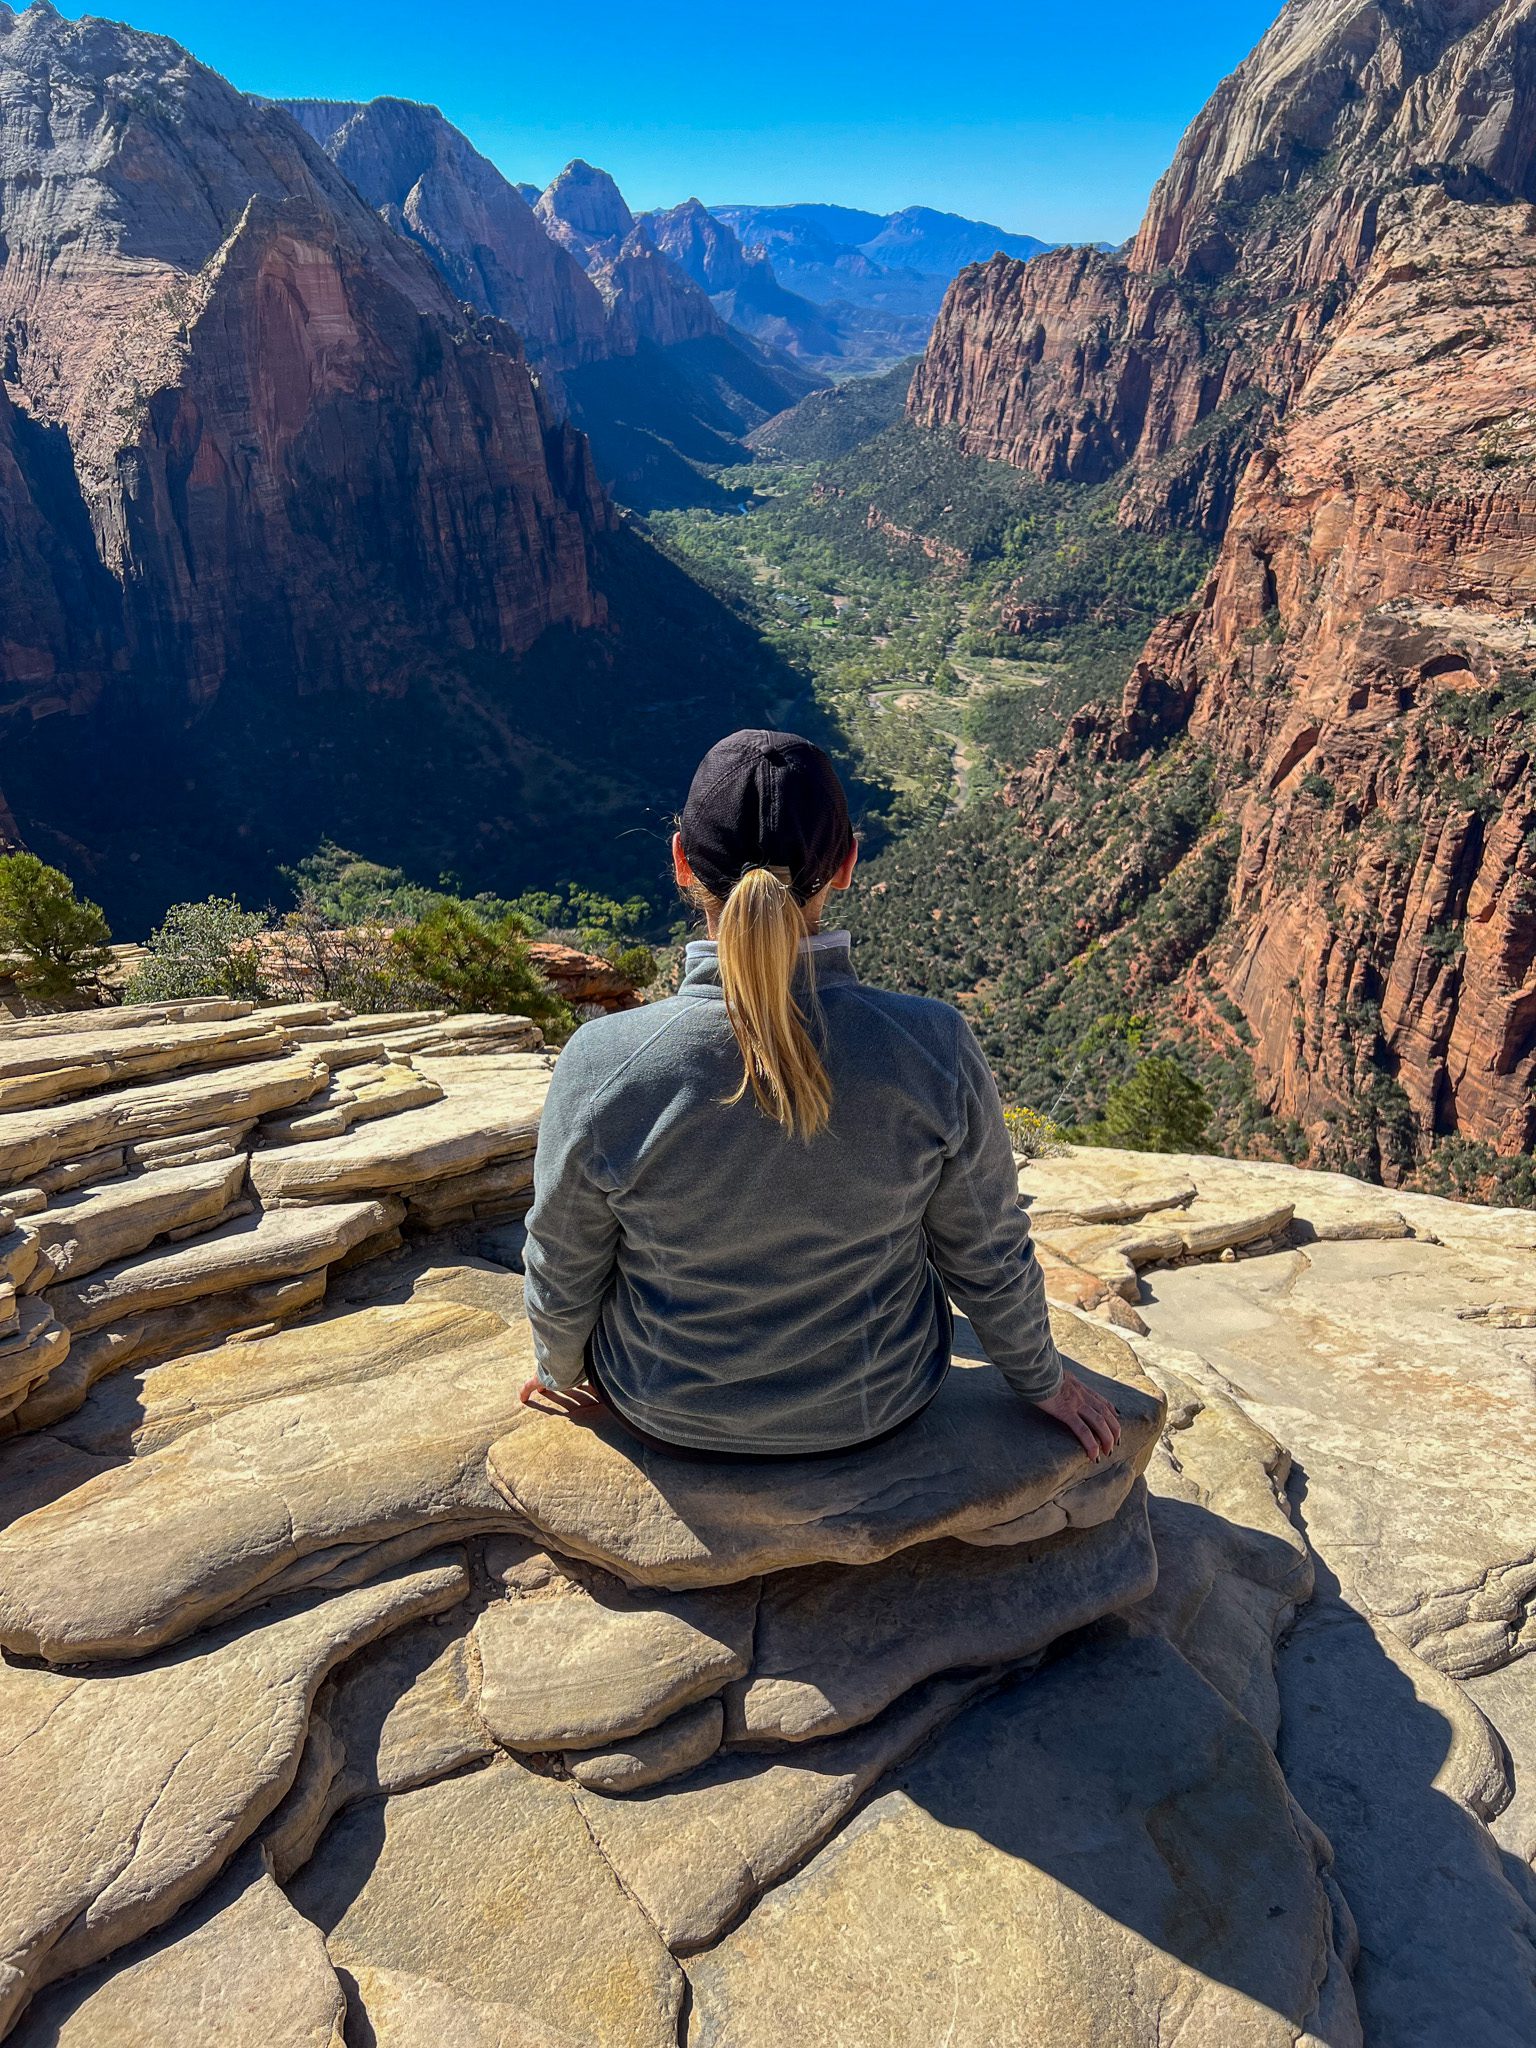 taking-in-the-view-from-angels-landing-after-facing-my-fears